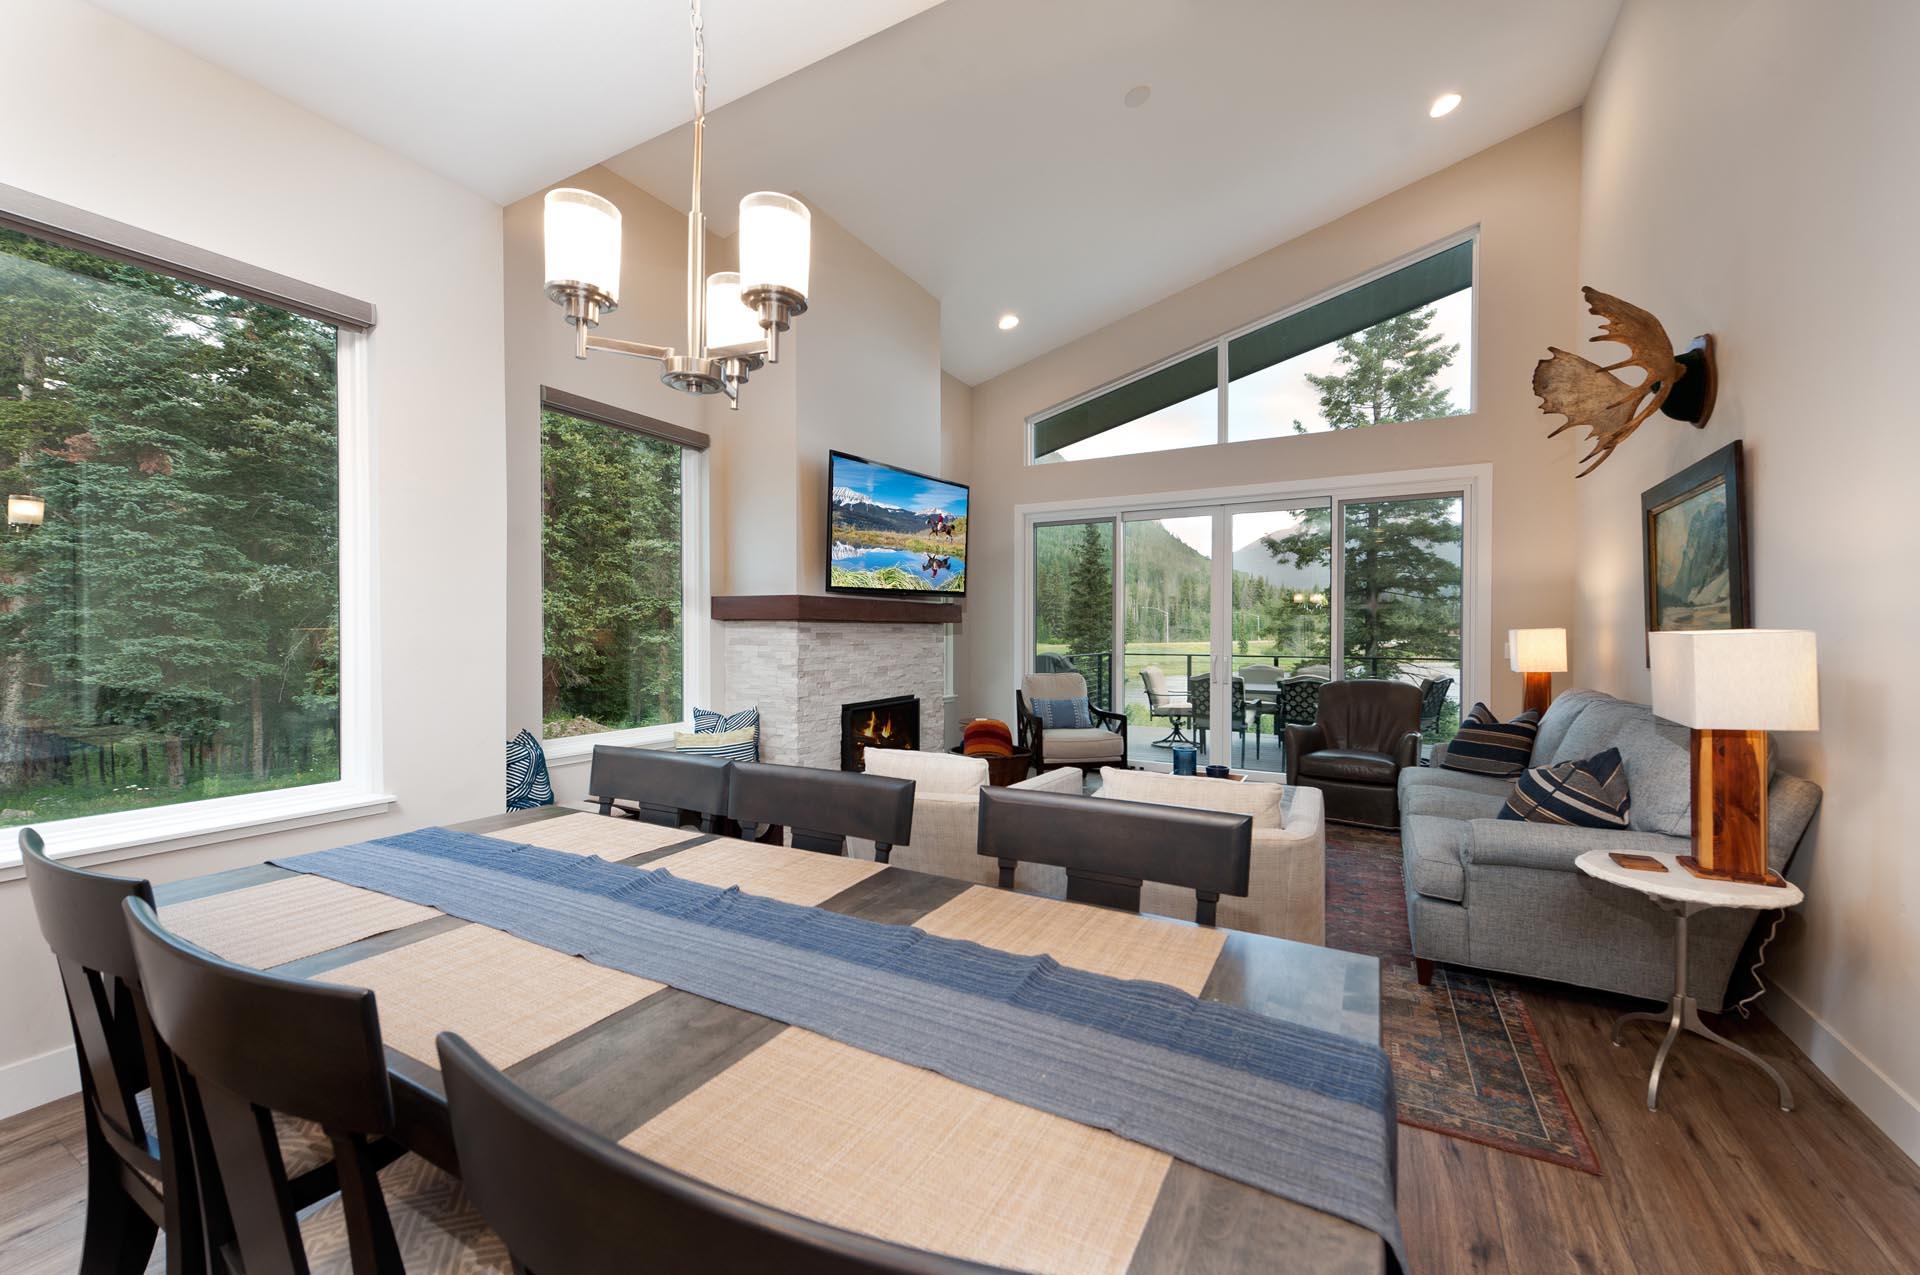 Main Living Space and Dining Spaces (TV, Gas Fireplace, Deck, Views and plenty of windows 